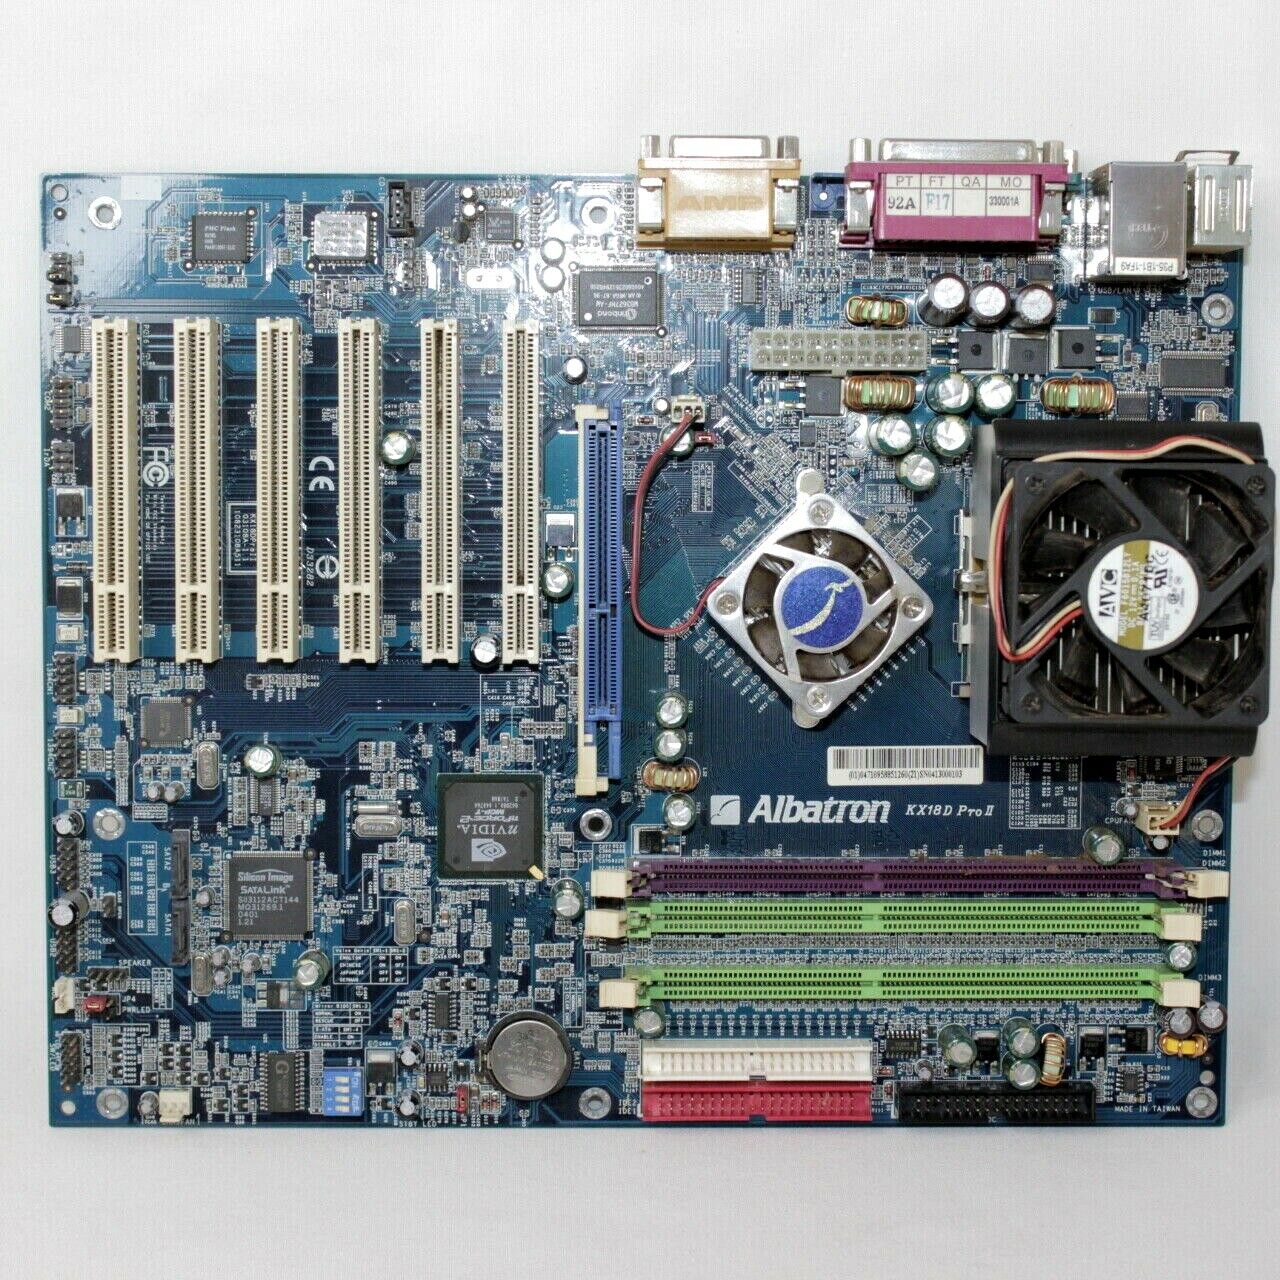 Albatron KX18D Pro II Motherboard & CPU from Tower Computer ** TESTED